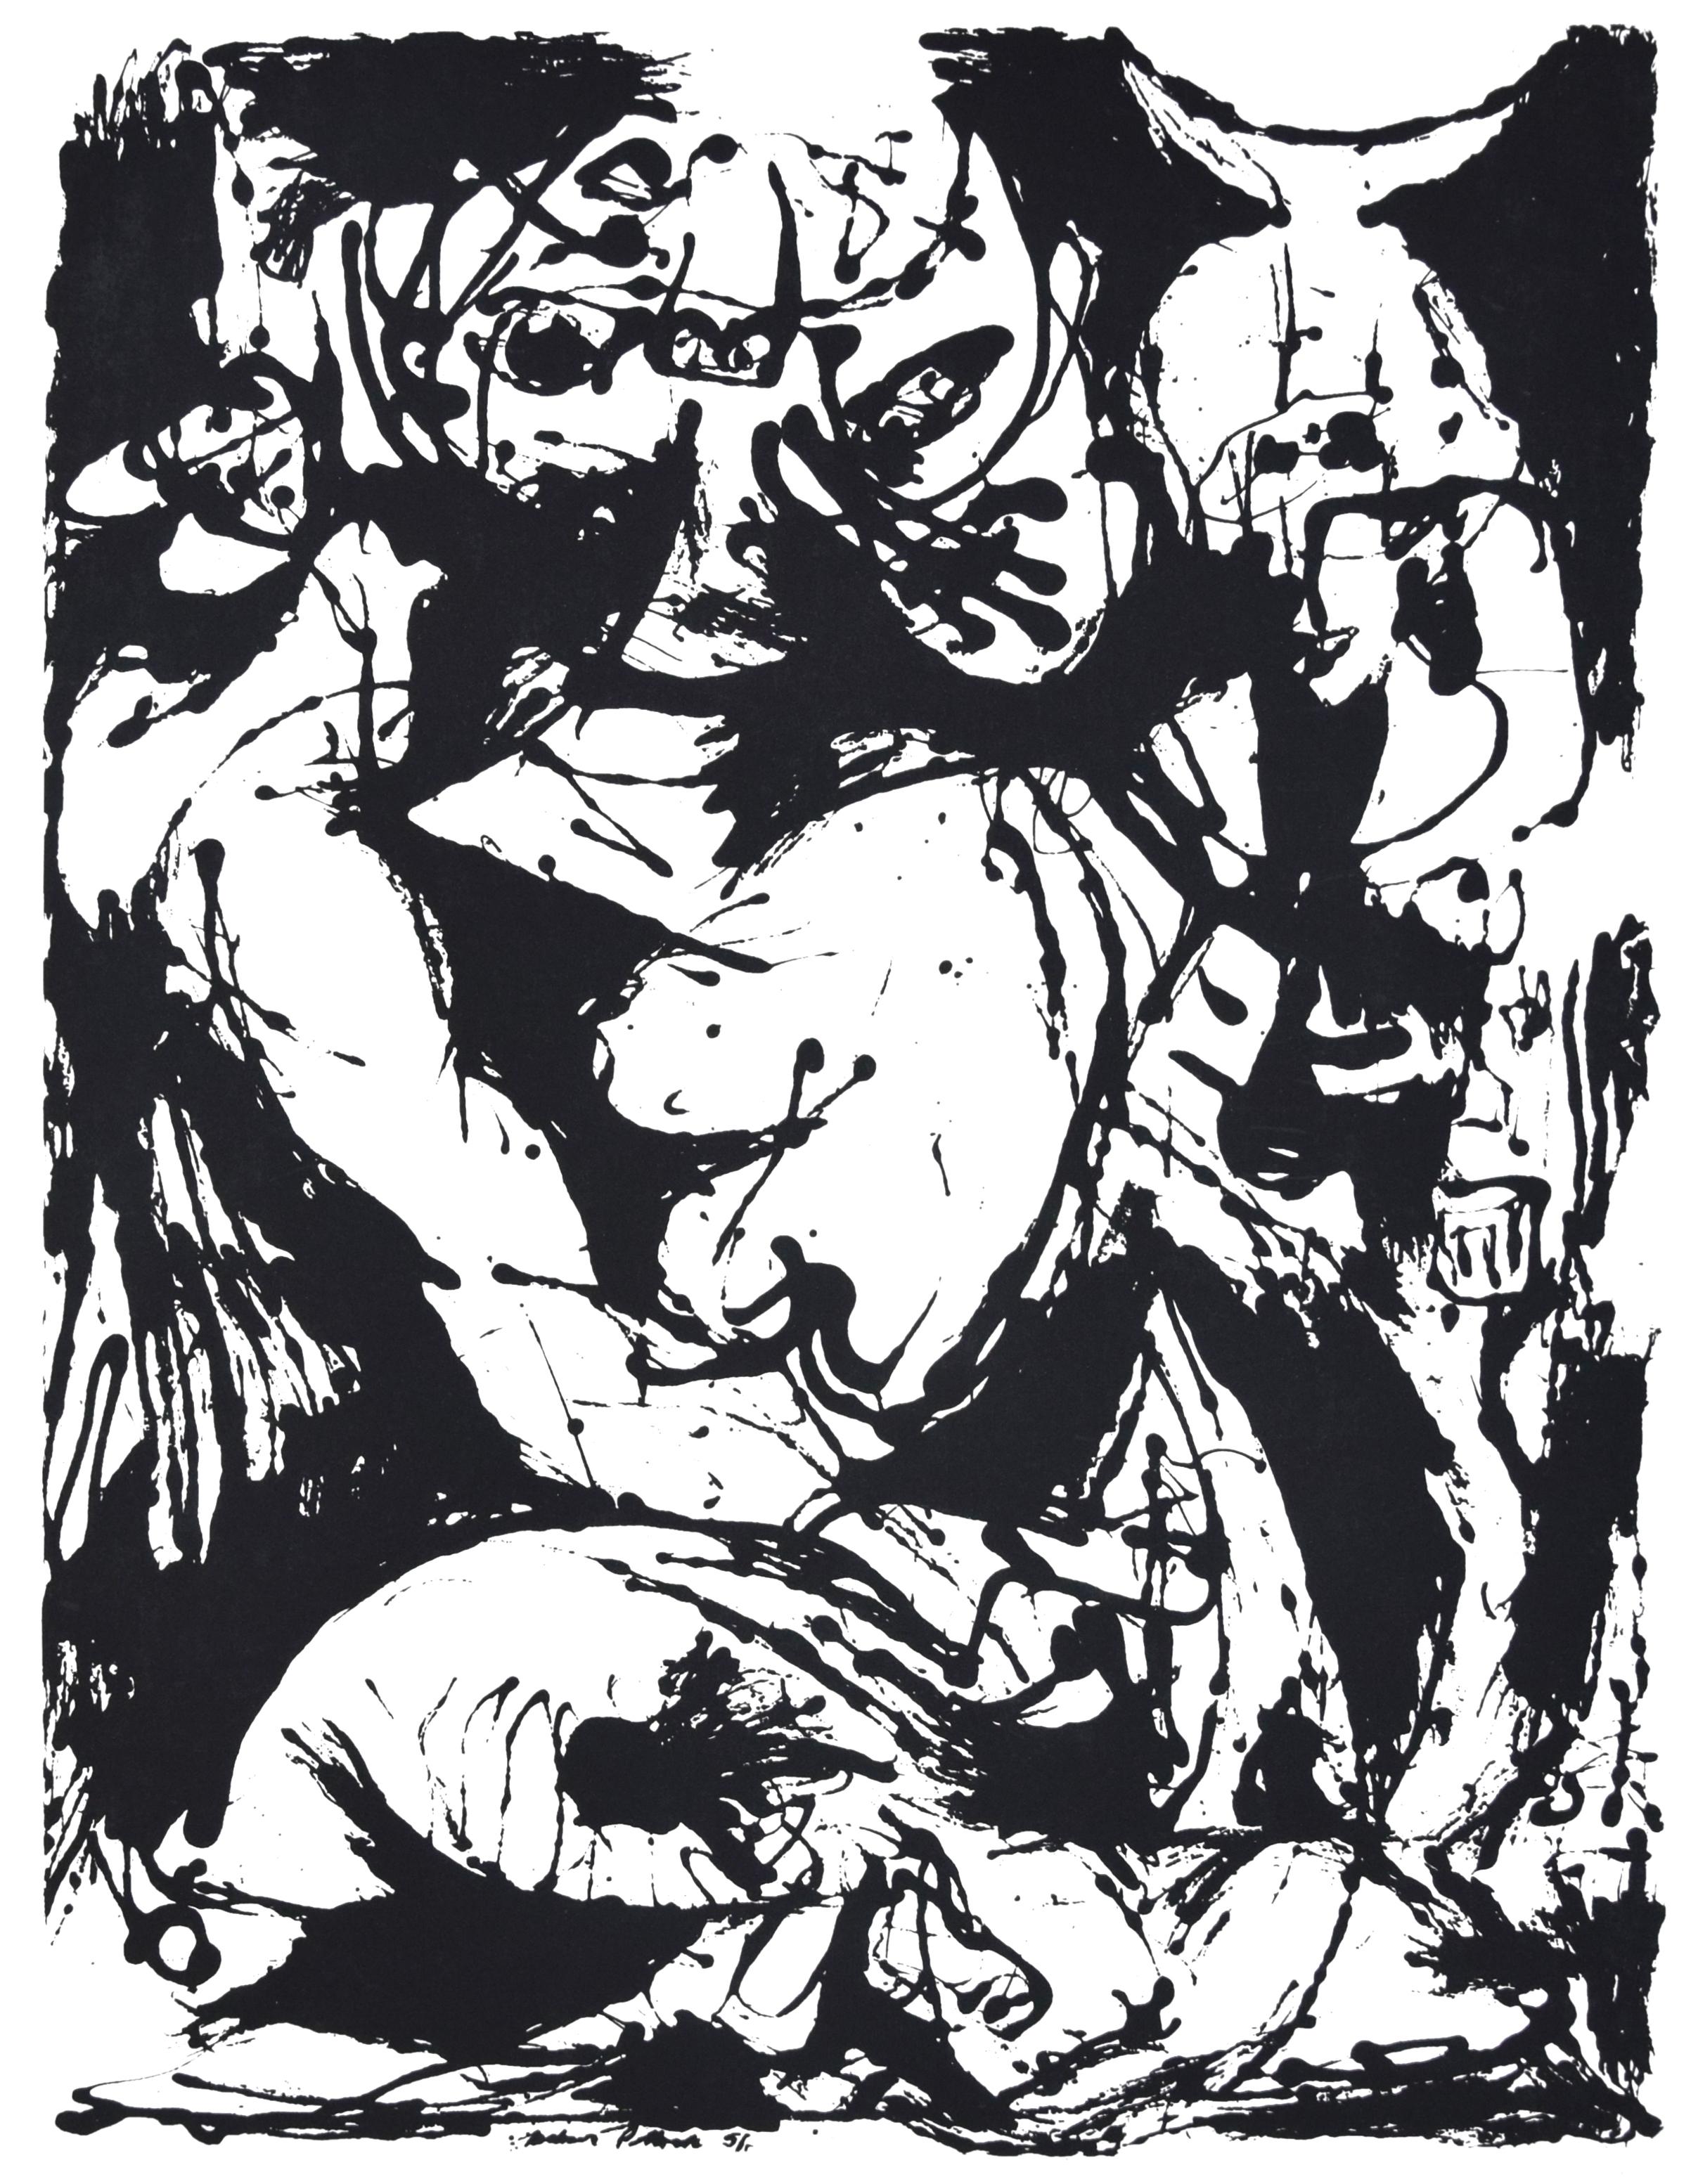 Untitled, CR1095 (after painting Number 22, CR344), 1951, printed 1964 - Print by Jackson Pollock